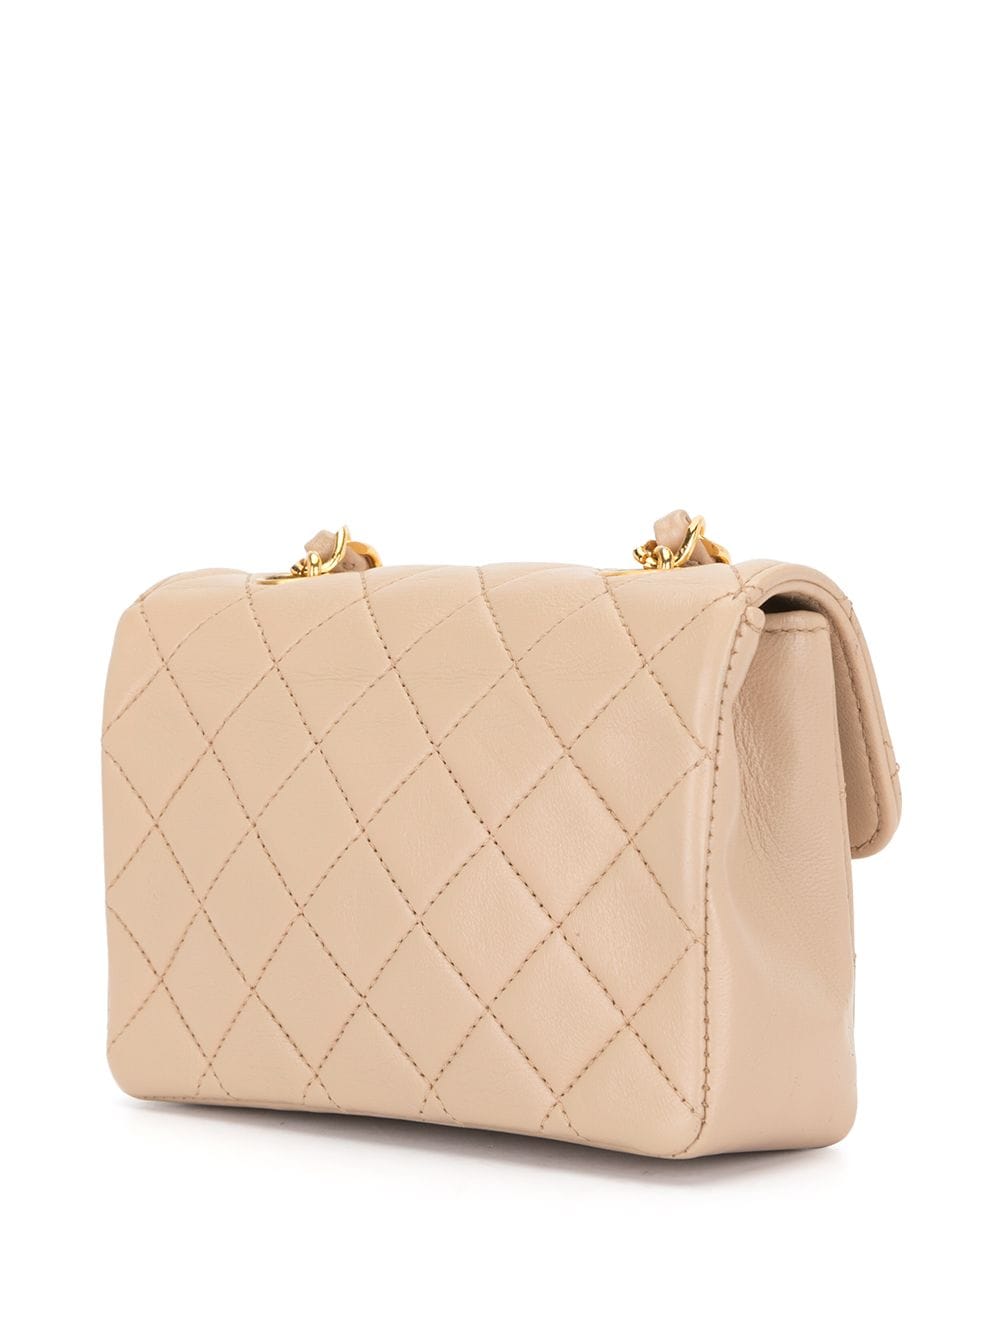 CHANEL Pre-Owned 1990 diamond-quilted Mini Bag - Farfetch